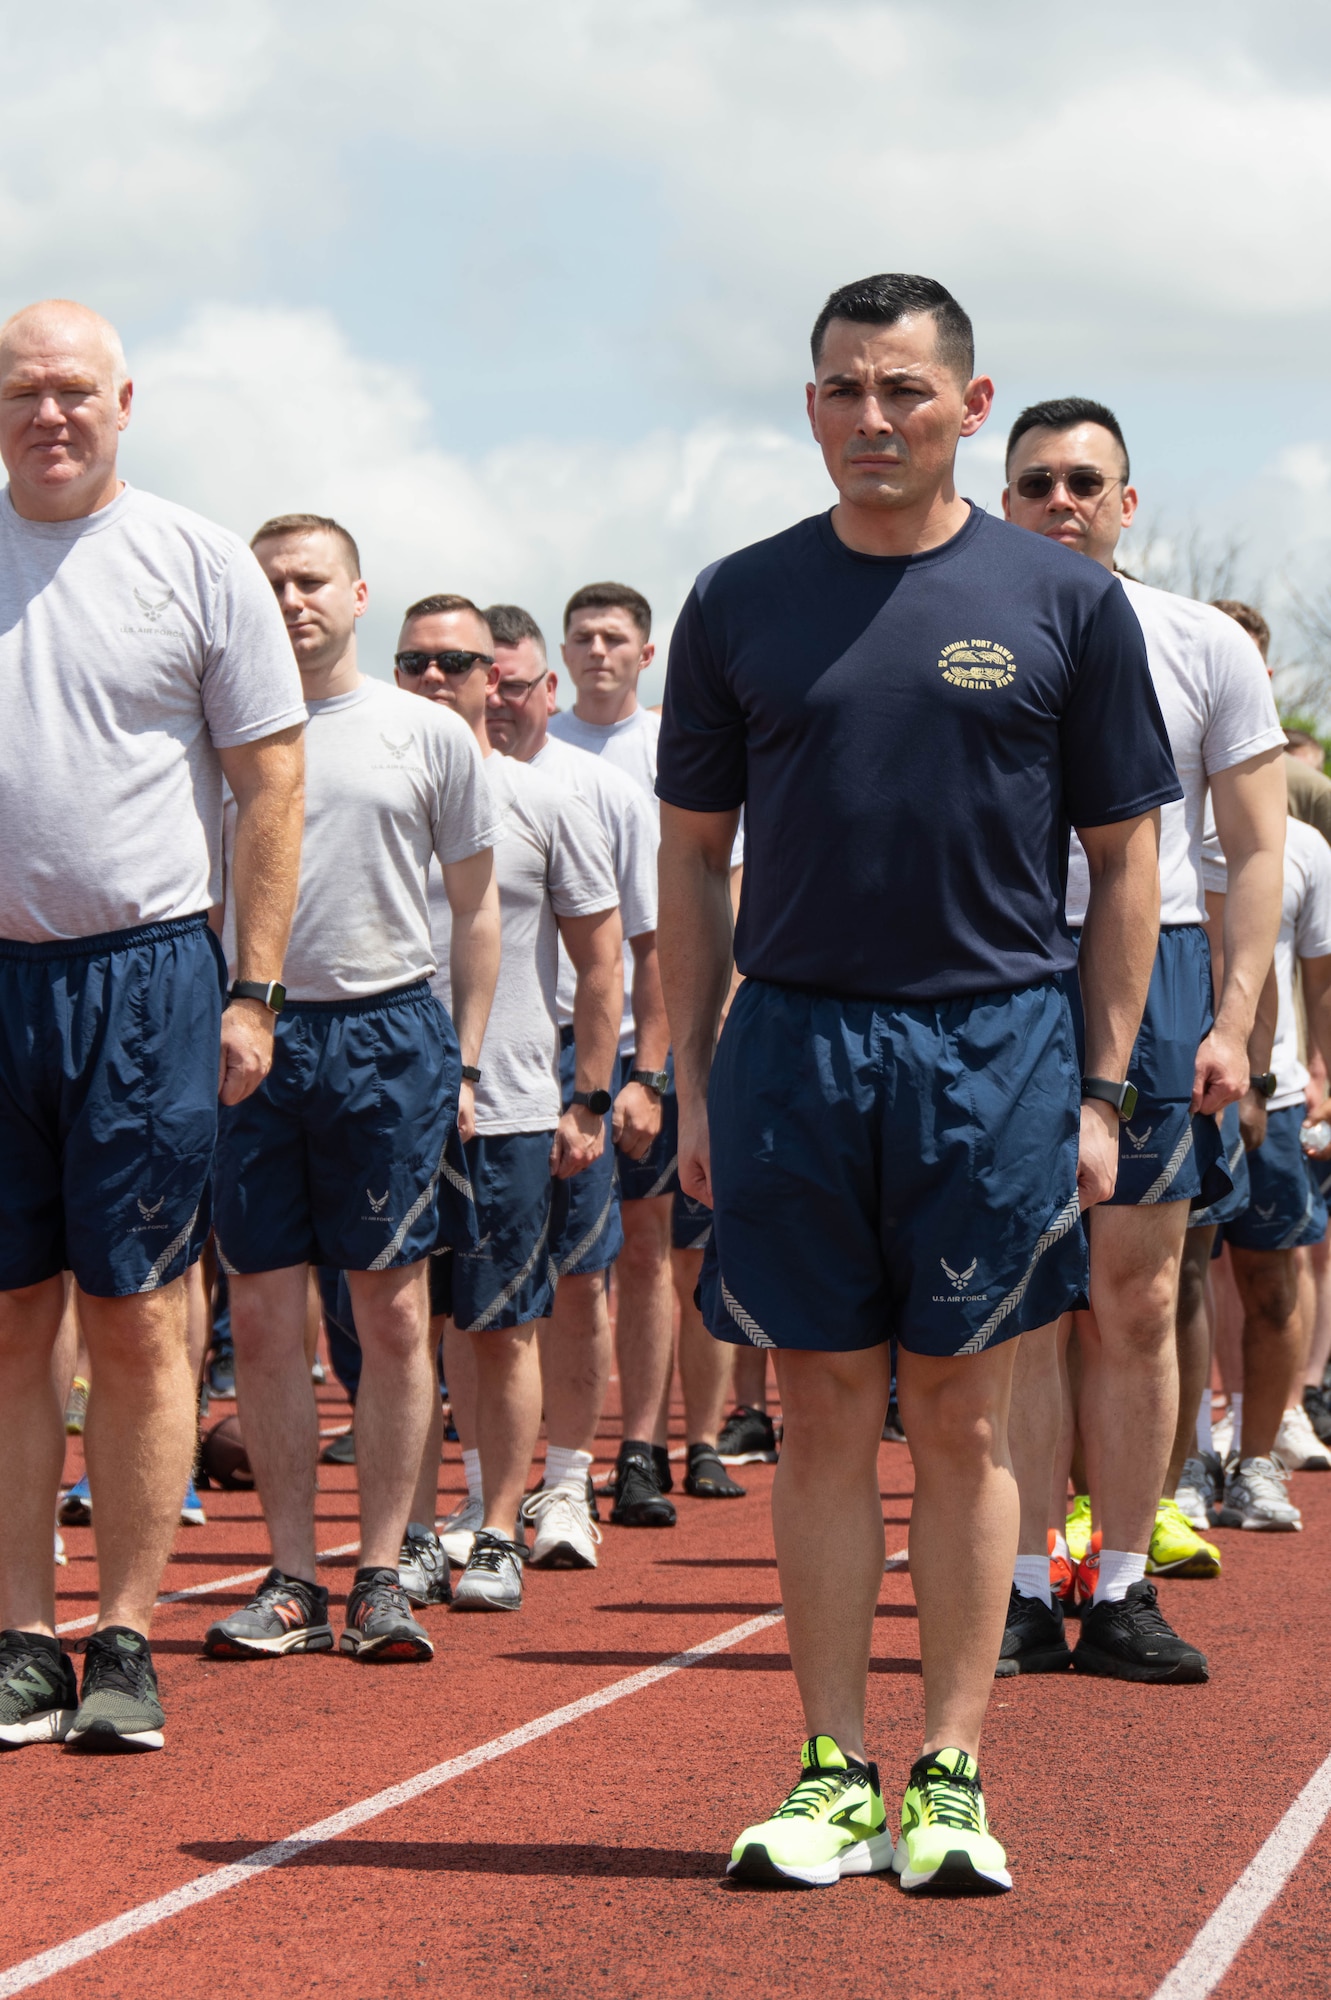 Airmen from the 69th Aerial Port Squadron stand in formation prior to participating in the Annual Port Dawg Memorial run at Joint Base Andrews, Md., May 15, 2022. The run, which began at Kadena Air Base, Japan, in 2013, honors Air Transportation Airmen who lost their lives over the past year. Seven aerial port Airmen died last year. Members in the career field say "they are 'blocked out,' but not forgotten." (U.S. Air Force Photo by Staff
Sgt. Andreaa Phillips)